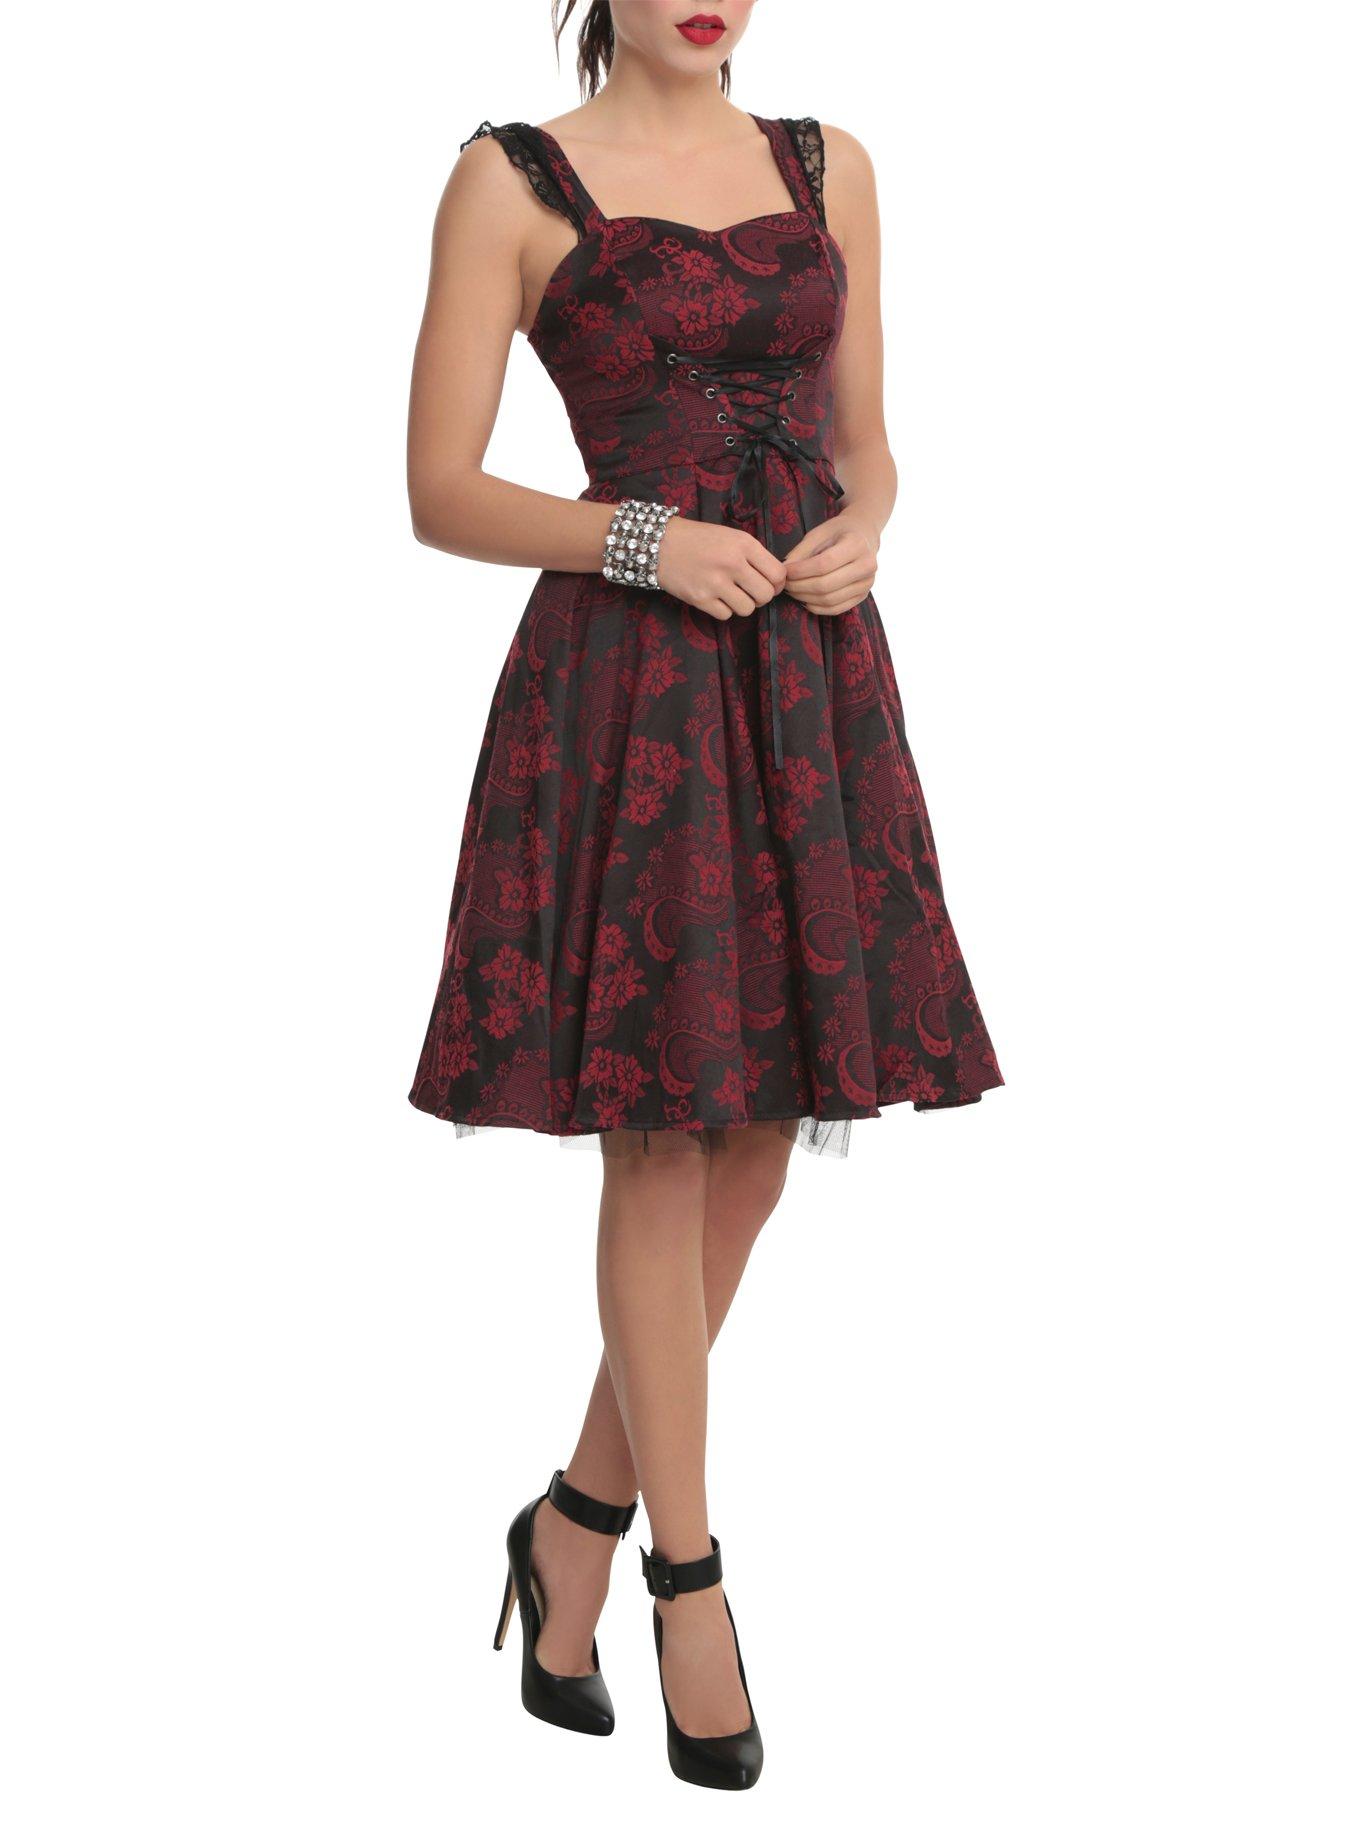 Red and Black Brocade Lace-Up Dress | Hot Topic